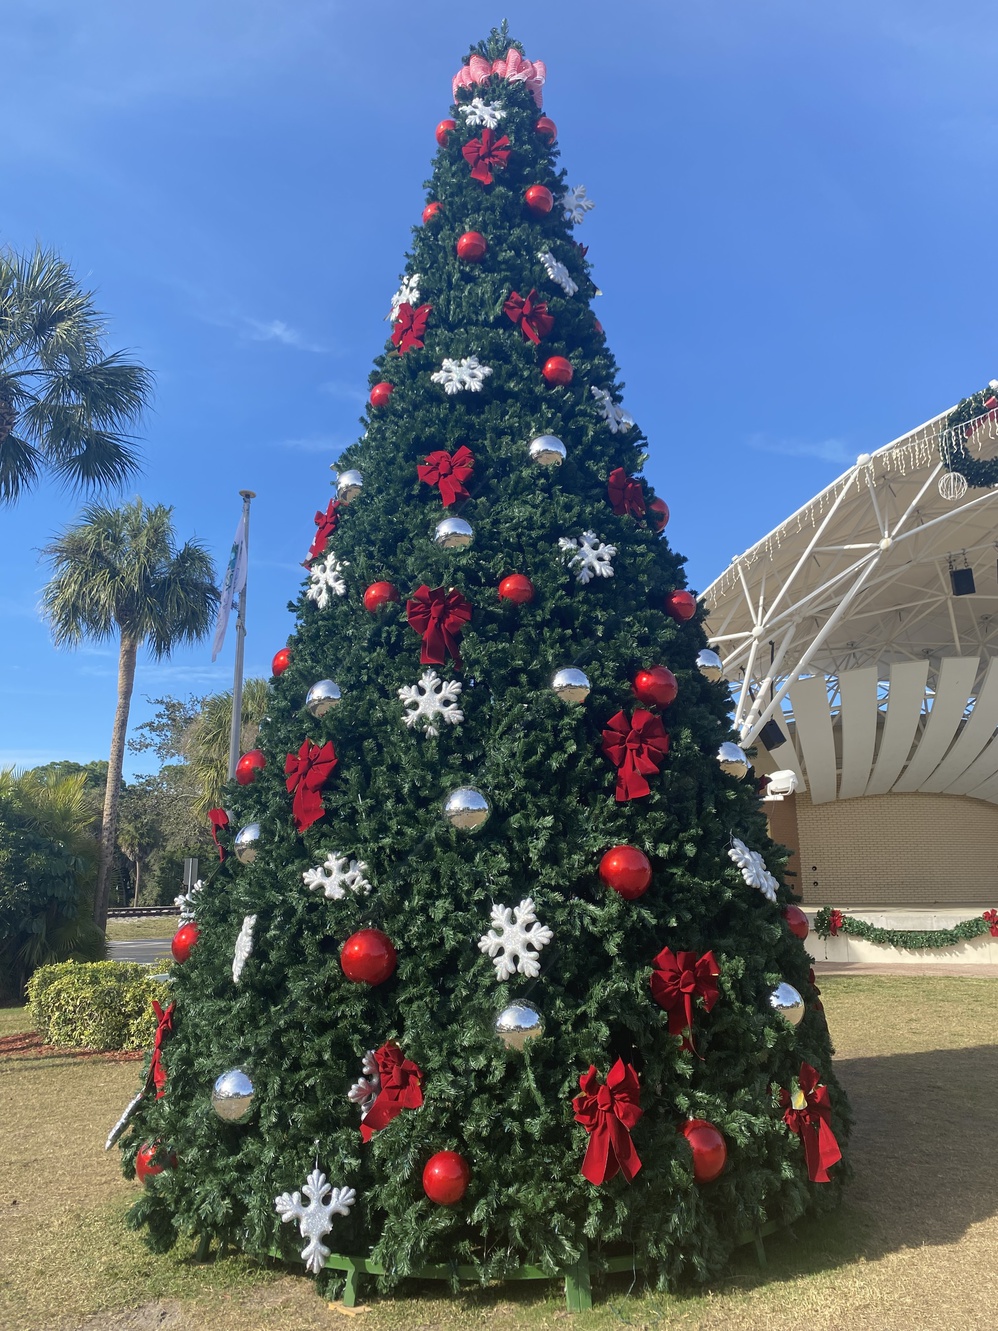 This Christmas tree was lit the previous evening for all of
      Bonita Springs to enjoy.